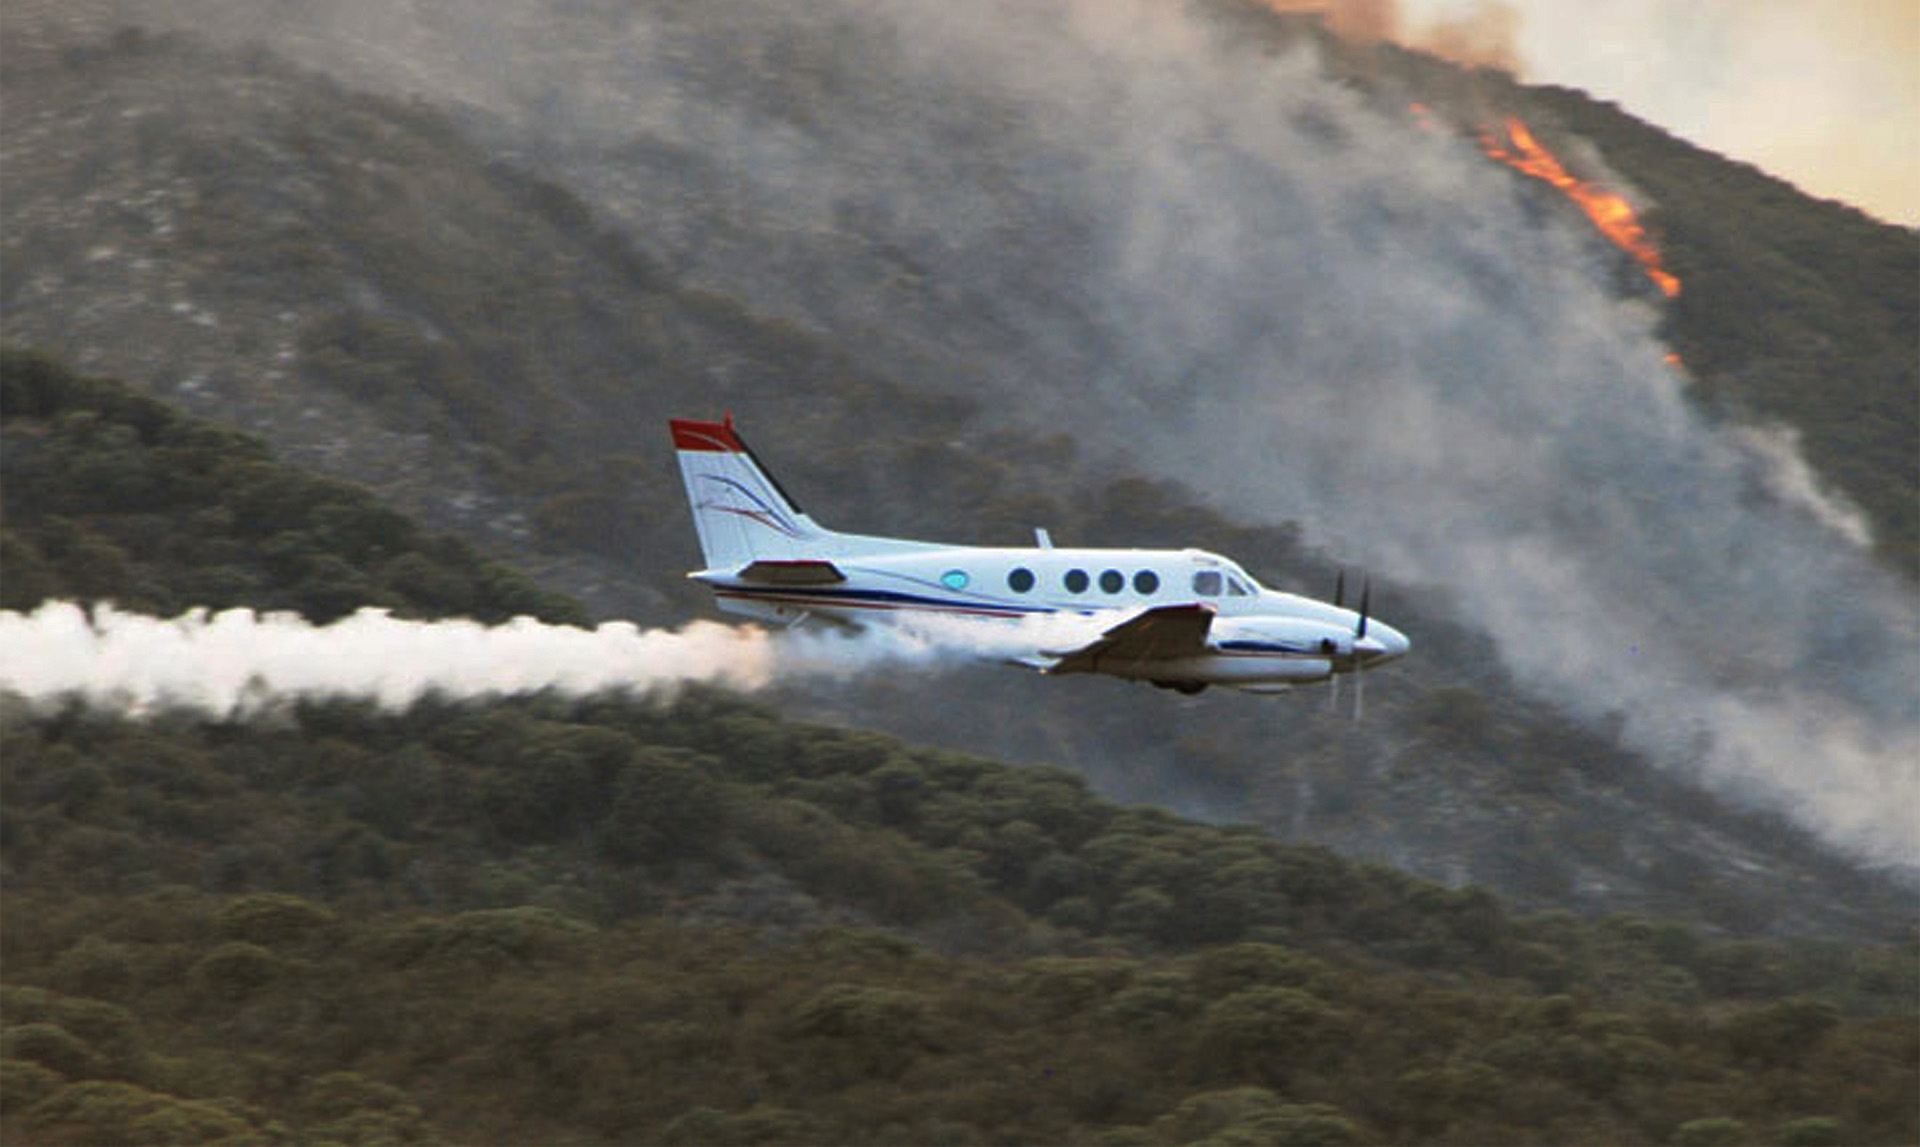 King Air 90 releasing smoke to indicate where tanker should drop deterrent